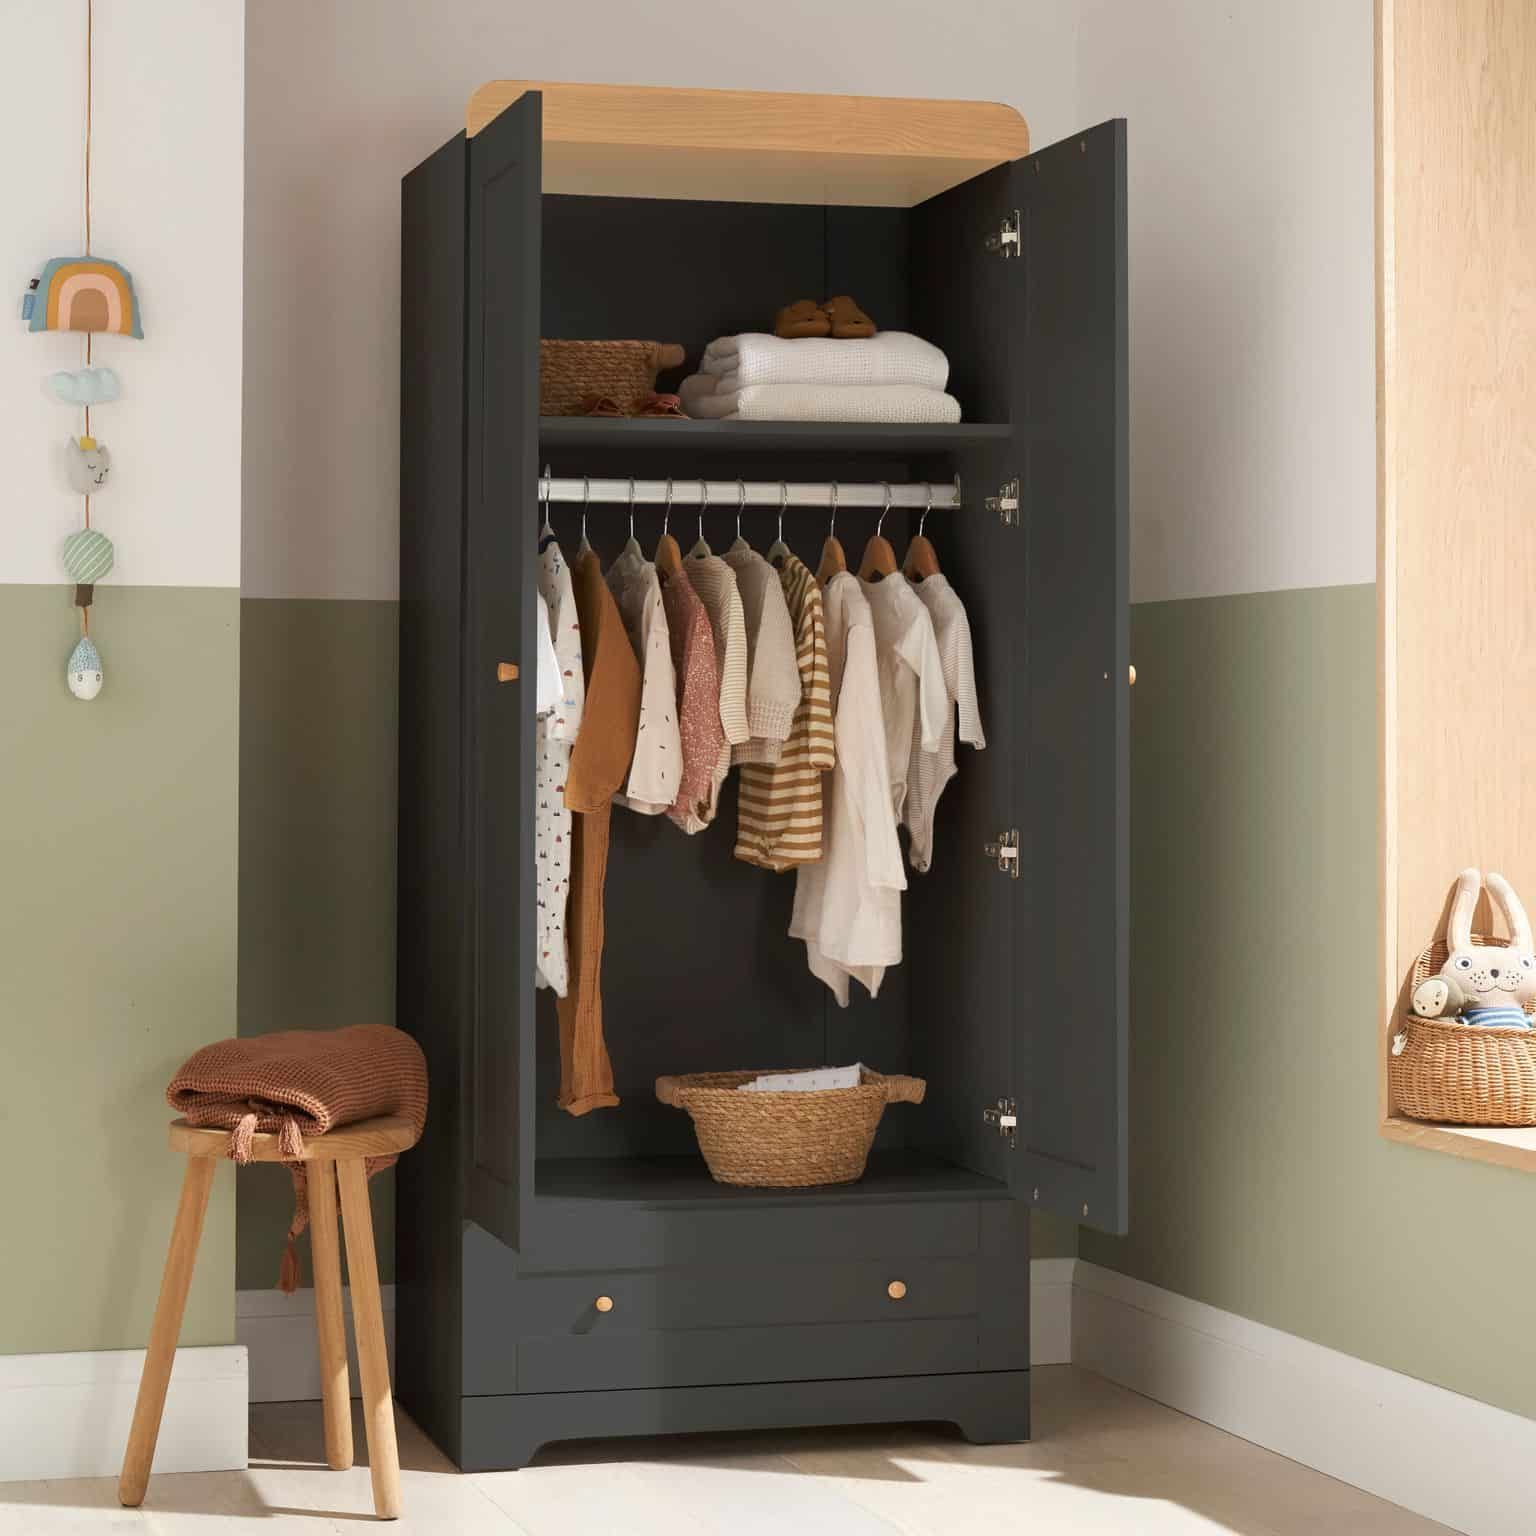 Tutti Bambini Rio Wardrobe – Slate/oak – Baby And Child Store With Double Rail Nursery Wardrobes (Gallery 7 of 20)